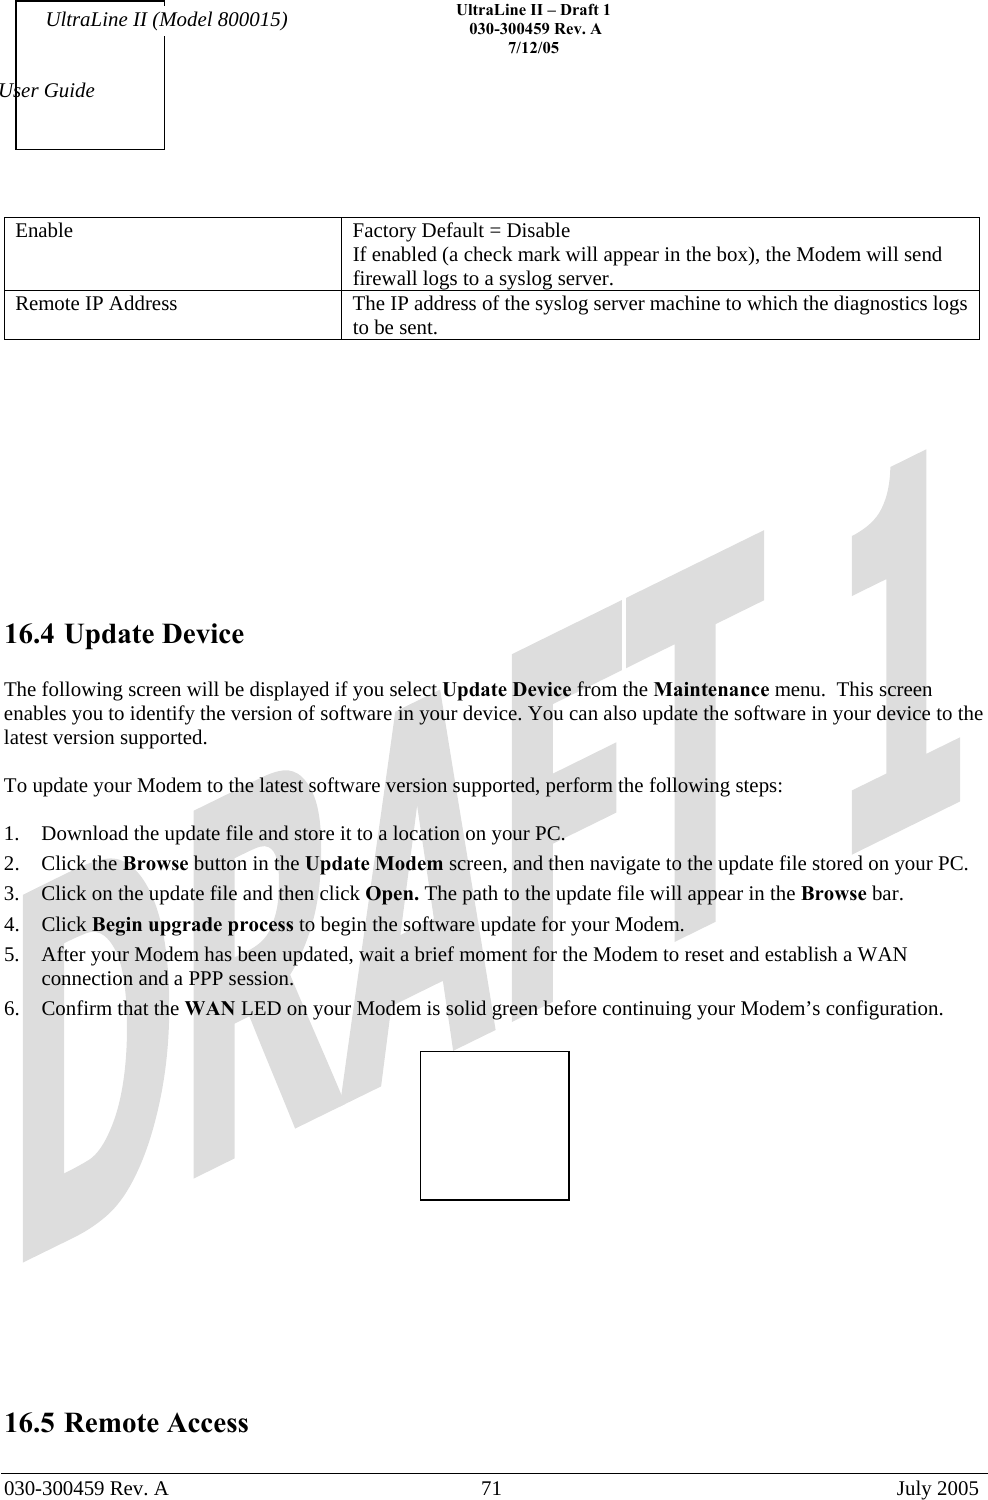    UltraLine II – Draft 1   030-300459 Rev. A 7/12/05   030-300459 Rev. A  71  July 2005  User Guide UltraLine II (Model 800015) Enable  Factory Default = Disable If enabled (a check mark will appear in the box), the Modem will send firewall logs to a syslog server. Remote IP Address  The IP address of the syslog server machine to which the diagnostics logs to be sent.            16.4 Update Device  The following screen will be displayed if you select Update Device from the Maintenance menu.  This screen enables you to identify the version of software in your device. You can also update the software in your device to the latest version supported.  To update your Modem to the latest software version supported, perform the following steps:  1.  Download the update file and store it to a location on your PC.  2. Click the Browse button in the Update Modem screen, and then navigate to the update file stored on your PC. 3.  Click on the update file and then click Open. The path to the update file will appear in the Browse bar. 4. Click Begin upgrade process to begin the software update for your Modem. 5.  After your Modem has been updated, wait a brief moment for the Modem to reset and establish a WAN connection and a PPP session. 6.  Confirm that the WAN LED on your Modem is solid green before continuing your Modem’s configuration.           16.5 Remote Access  